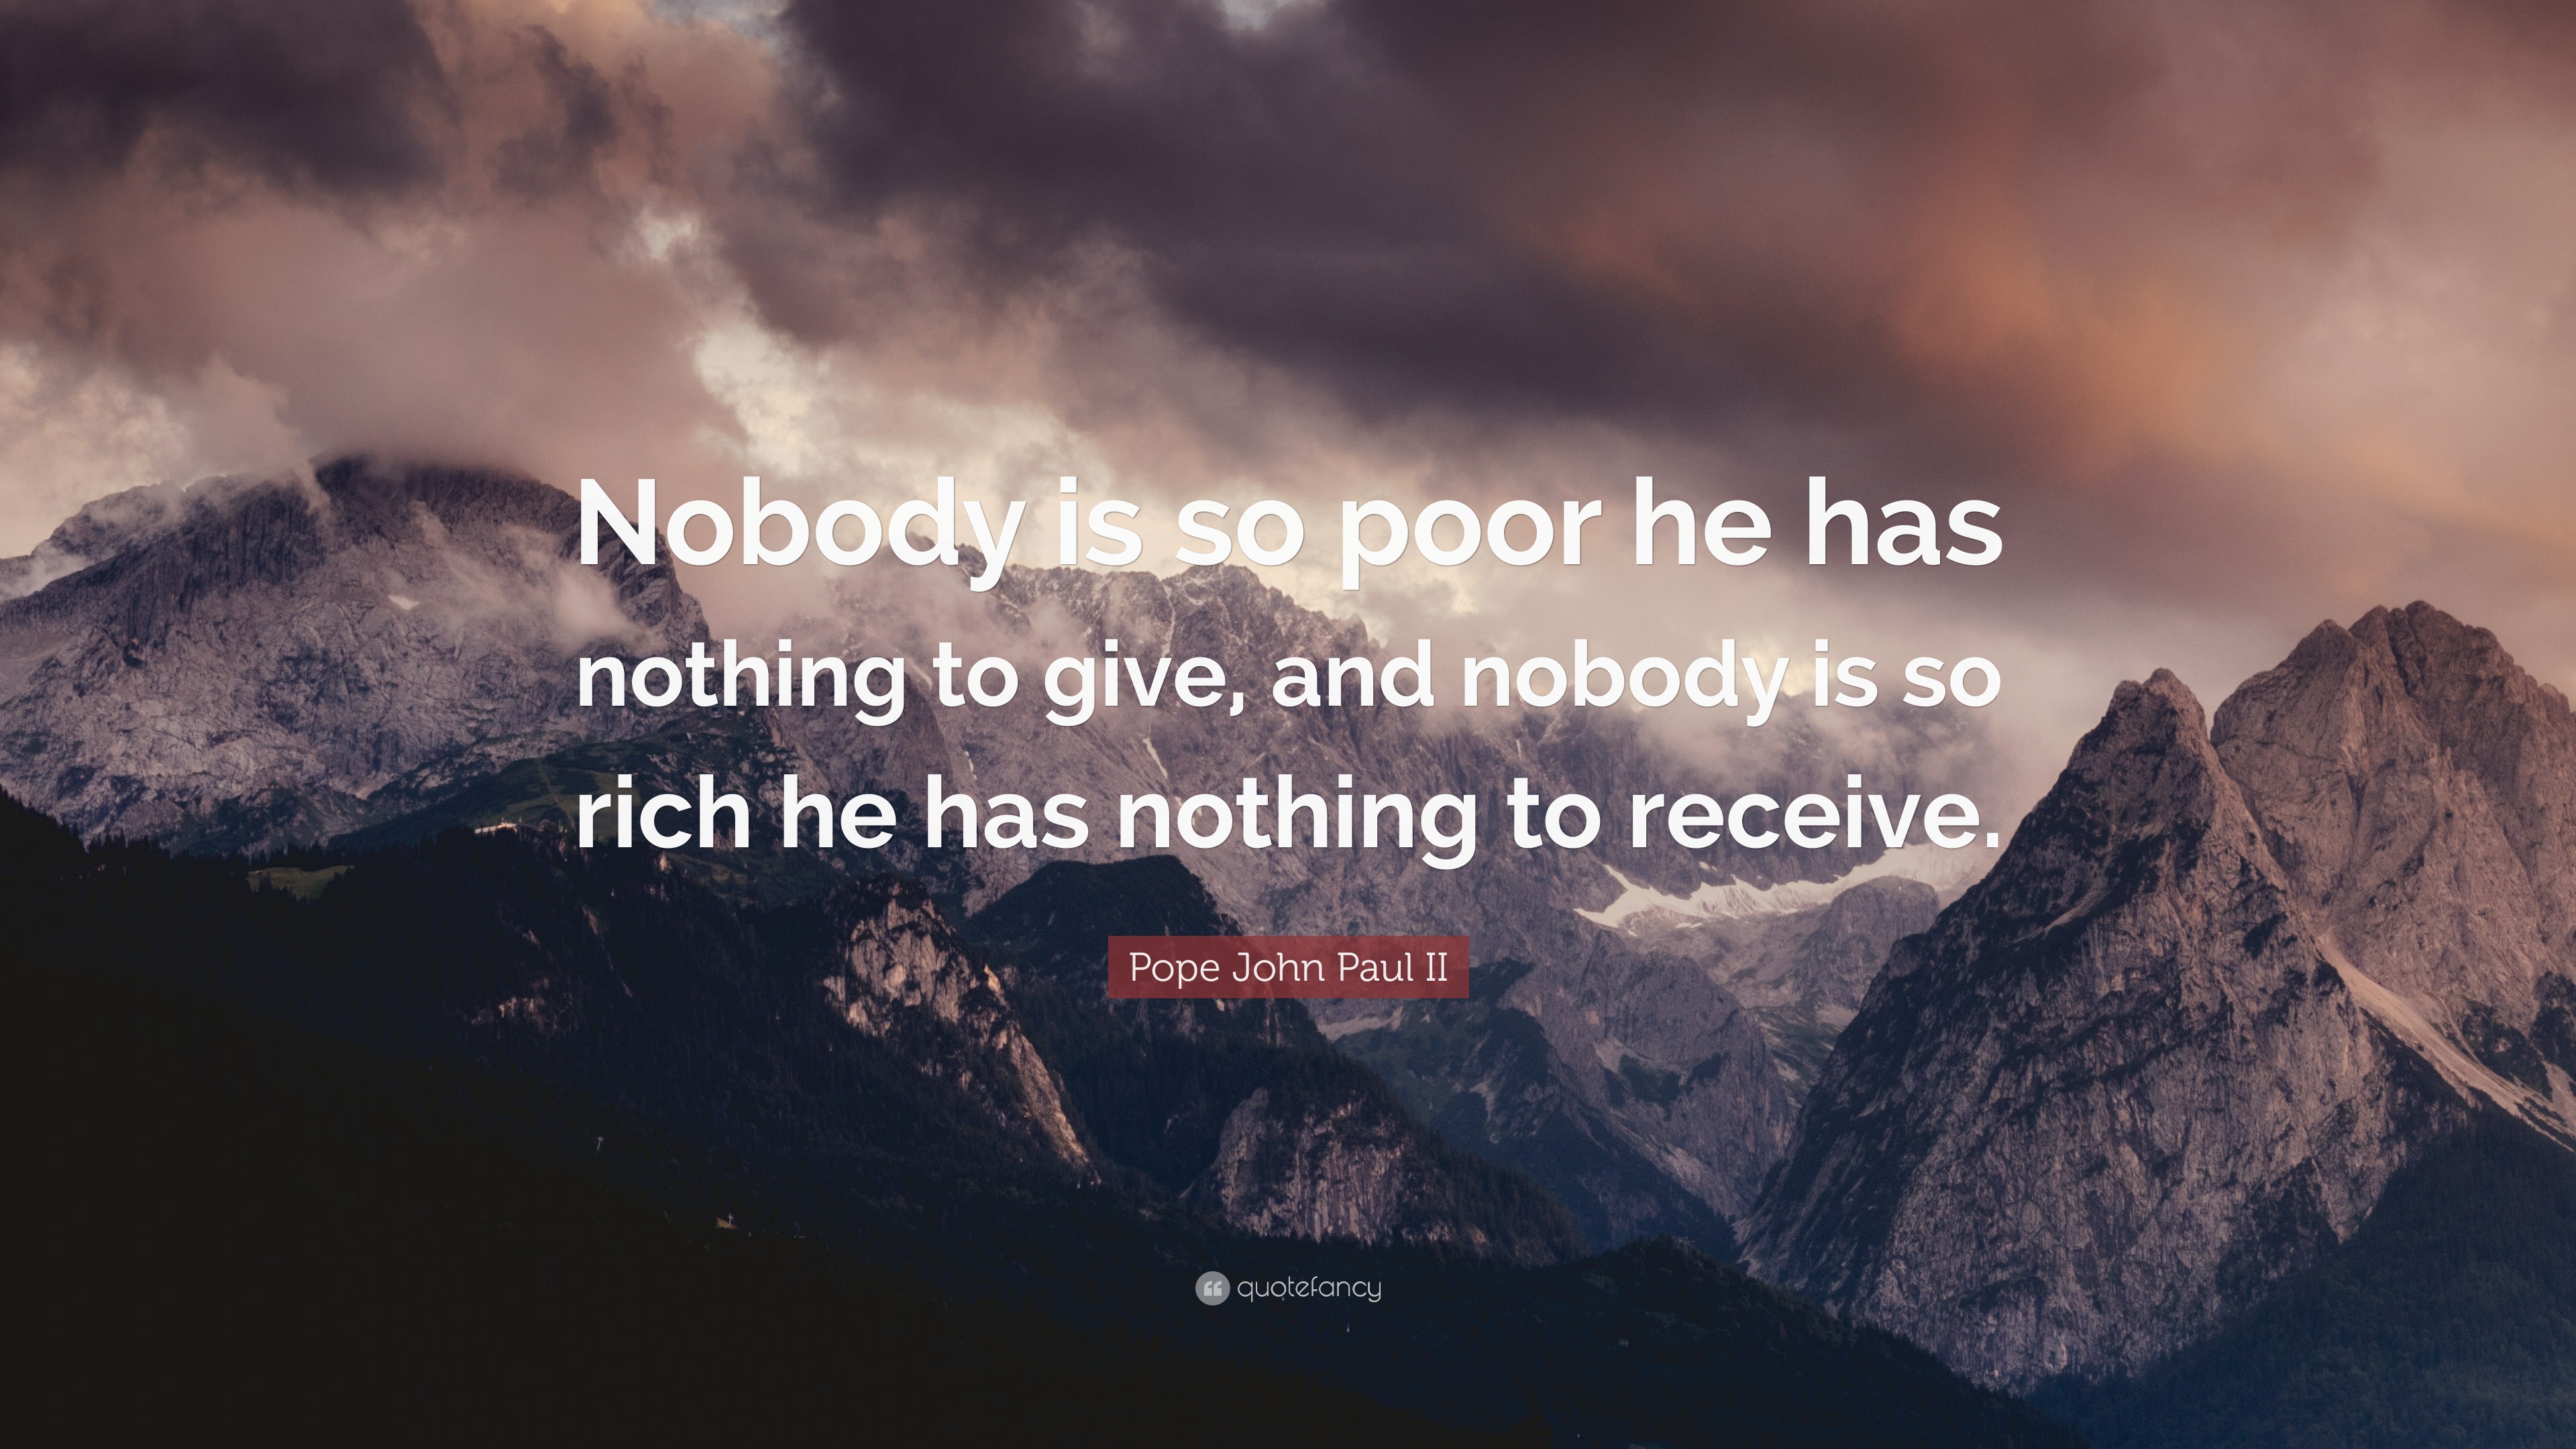 2131187 Pope John Paul II Quote Nobody is so poor he has nothing to give